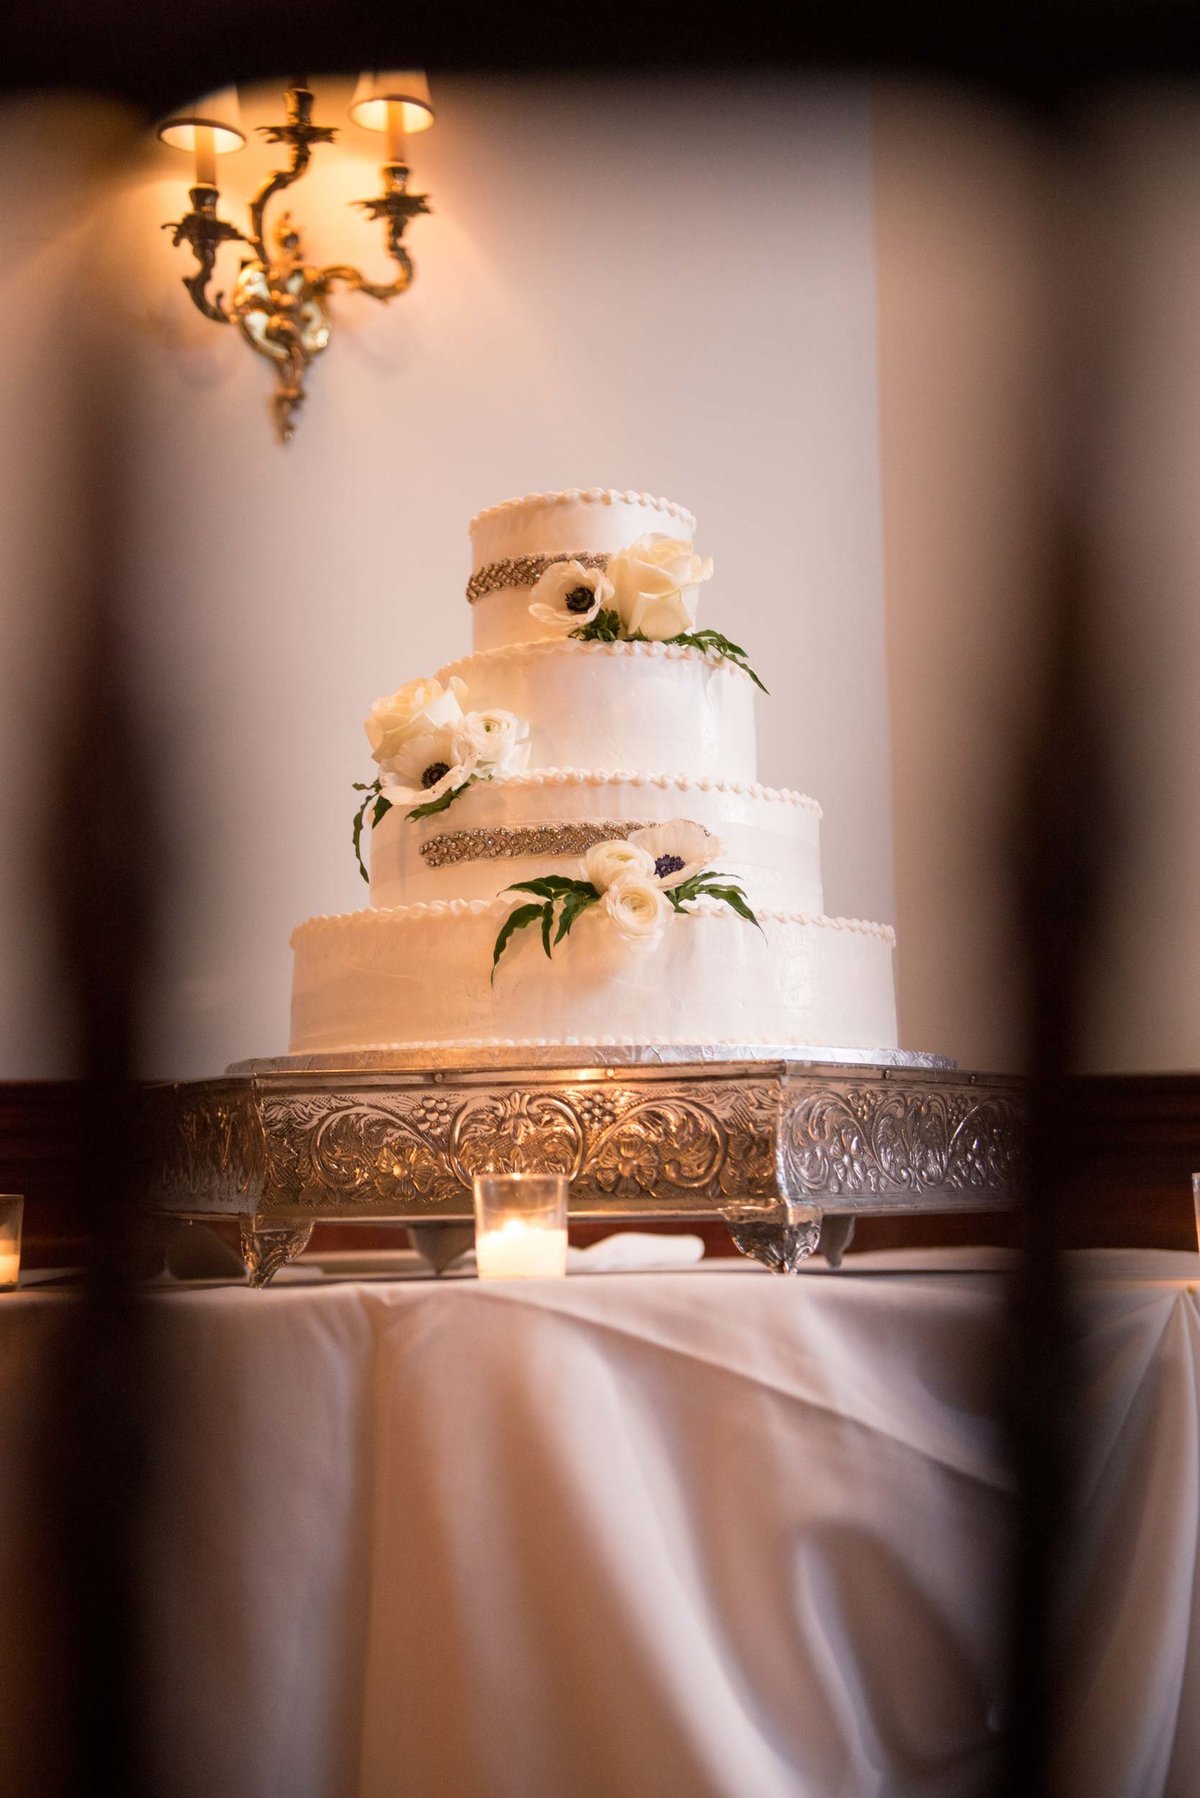 Wedding cake from The Mansion at Oyster Bay